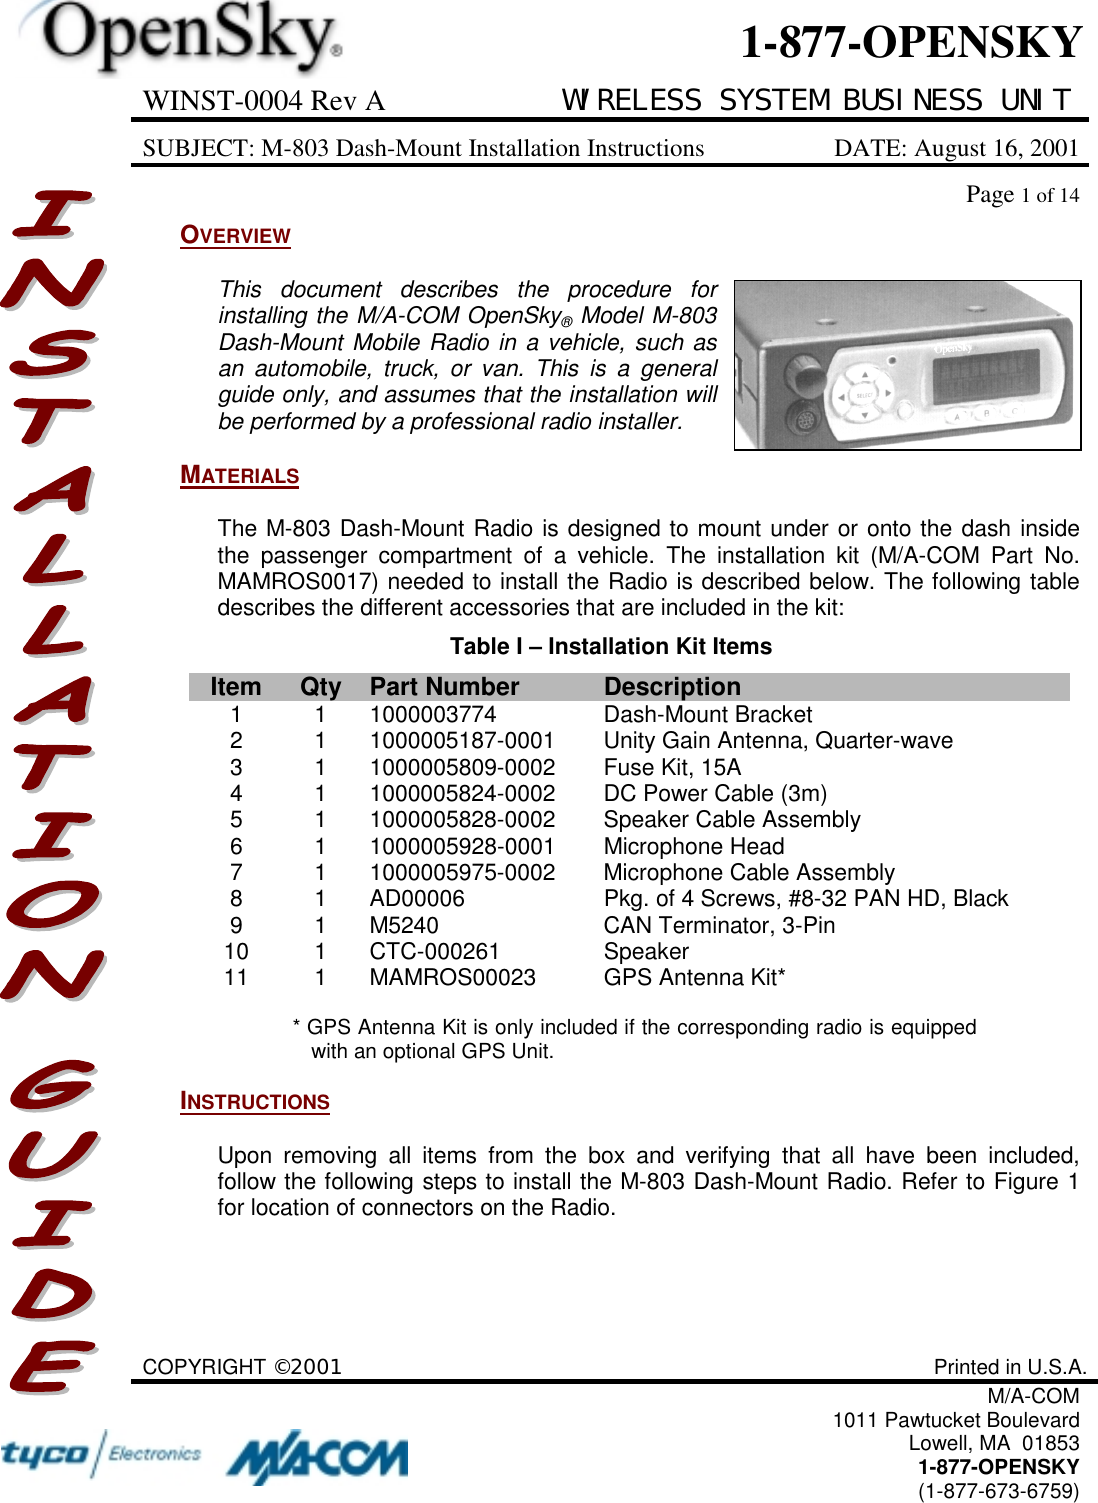 WINST-0004 Rev A WIRELESS SYSTEM BUSINESS UNITSUBJECT: M-803 Dash-Mount Installation Instructions DATE: August 16, 2001Page 1 of 14COPYRIGHT ©2001 Printed in U.S.A.M/A-COM1011 Pawtucket BoulevardLowell, MA  018531-877-OPENSKY(1-877-673-6759)1-877-OPENSKYOVERVIEWThis document describes the procedure forinstalling the M/A-COM OpenSky® Model M-803Dash-Mount Mobile Radio in a vehicle, such asan automobile, truck, or van. This is a generalguide only, and assumes that the installation willbe performed by a professional radio installer.MATERIALSThe M-803 Dash-Mount Radio is designed to mount under or onto the dash insidethe passenger compartment of a vehicle. The installation kit (M/A-COM Part No.MAMROS0017) needed to install the Radio is described below. The following tabledescribes the different accessories that are included in the kit:Table I – Installation Kit ItemsItem Qty Part Number Description1 1 1000003774 Dash-Mount Bracket2 1 1000005187-0001 Unity Gain Antenna, Quarter-wave3 1 1000005809-0002 Fuse Kit, 15A4 1 1000005824-0002 DC Power Cable (3m)5 1 1000005828-0002 Speaker Cable Assembly6 1 1000005928-0001 Microphone Head7 1 1000005975-0002 Microphone Cable Assembly8 1 AD00006 Pkg. of 4 Screws, #8-32 PAN HD, Black9 1 M5240 CAN Terminator, 3-Pin10 1 CTC-000261 Speaker11 1 MAMROS00023 GPS Antenna Kit** GPS Antenna Kit is only included if the corresponding radio is equippedwith an optional GPS Unit.INSTRUCTIONSUpon removing all items from the box and verifying that all have been included,follow the following steps to install the M-803 Dash-Mount Radio. Refer to Figure 1for location of connectors on the Radio.